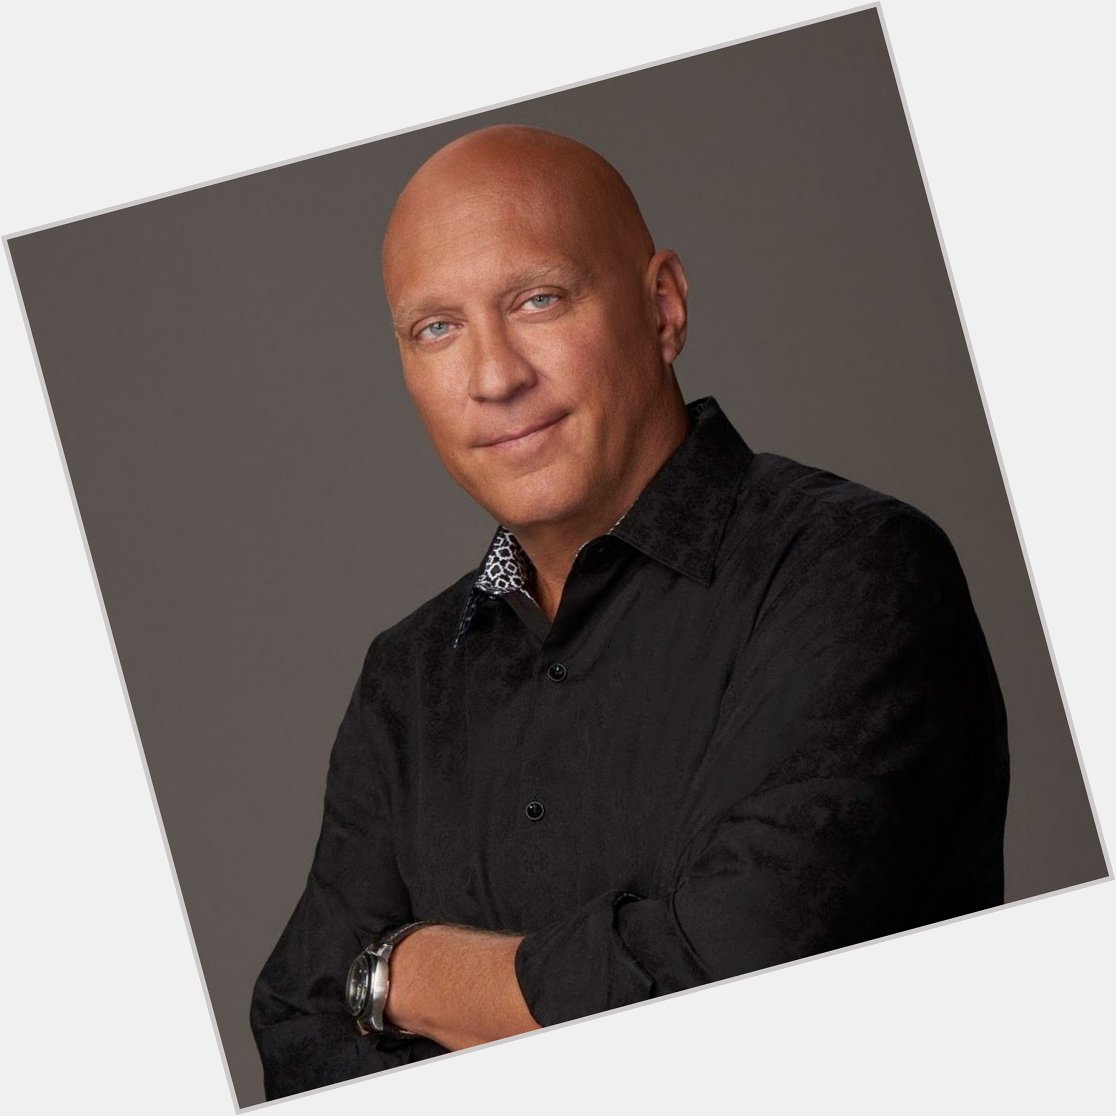  ON WITH Wishes:
Steve Wilkos A Happy Birthday! 